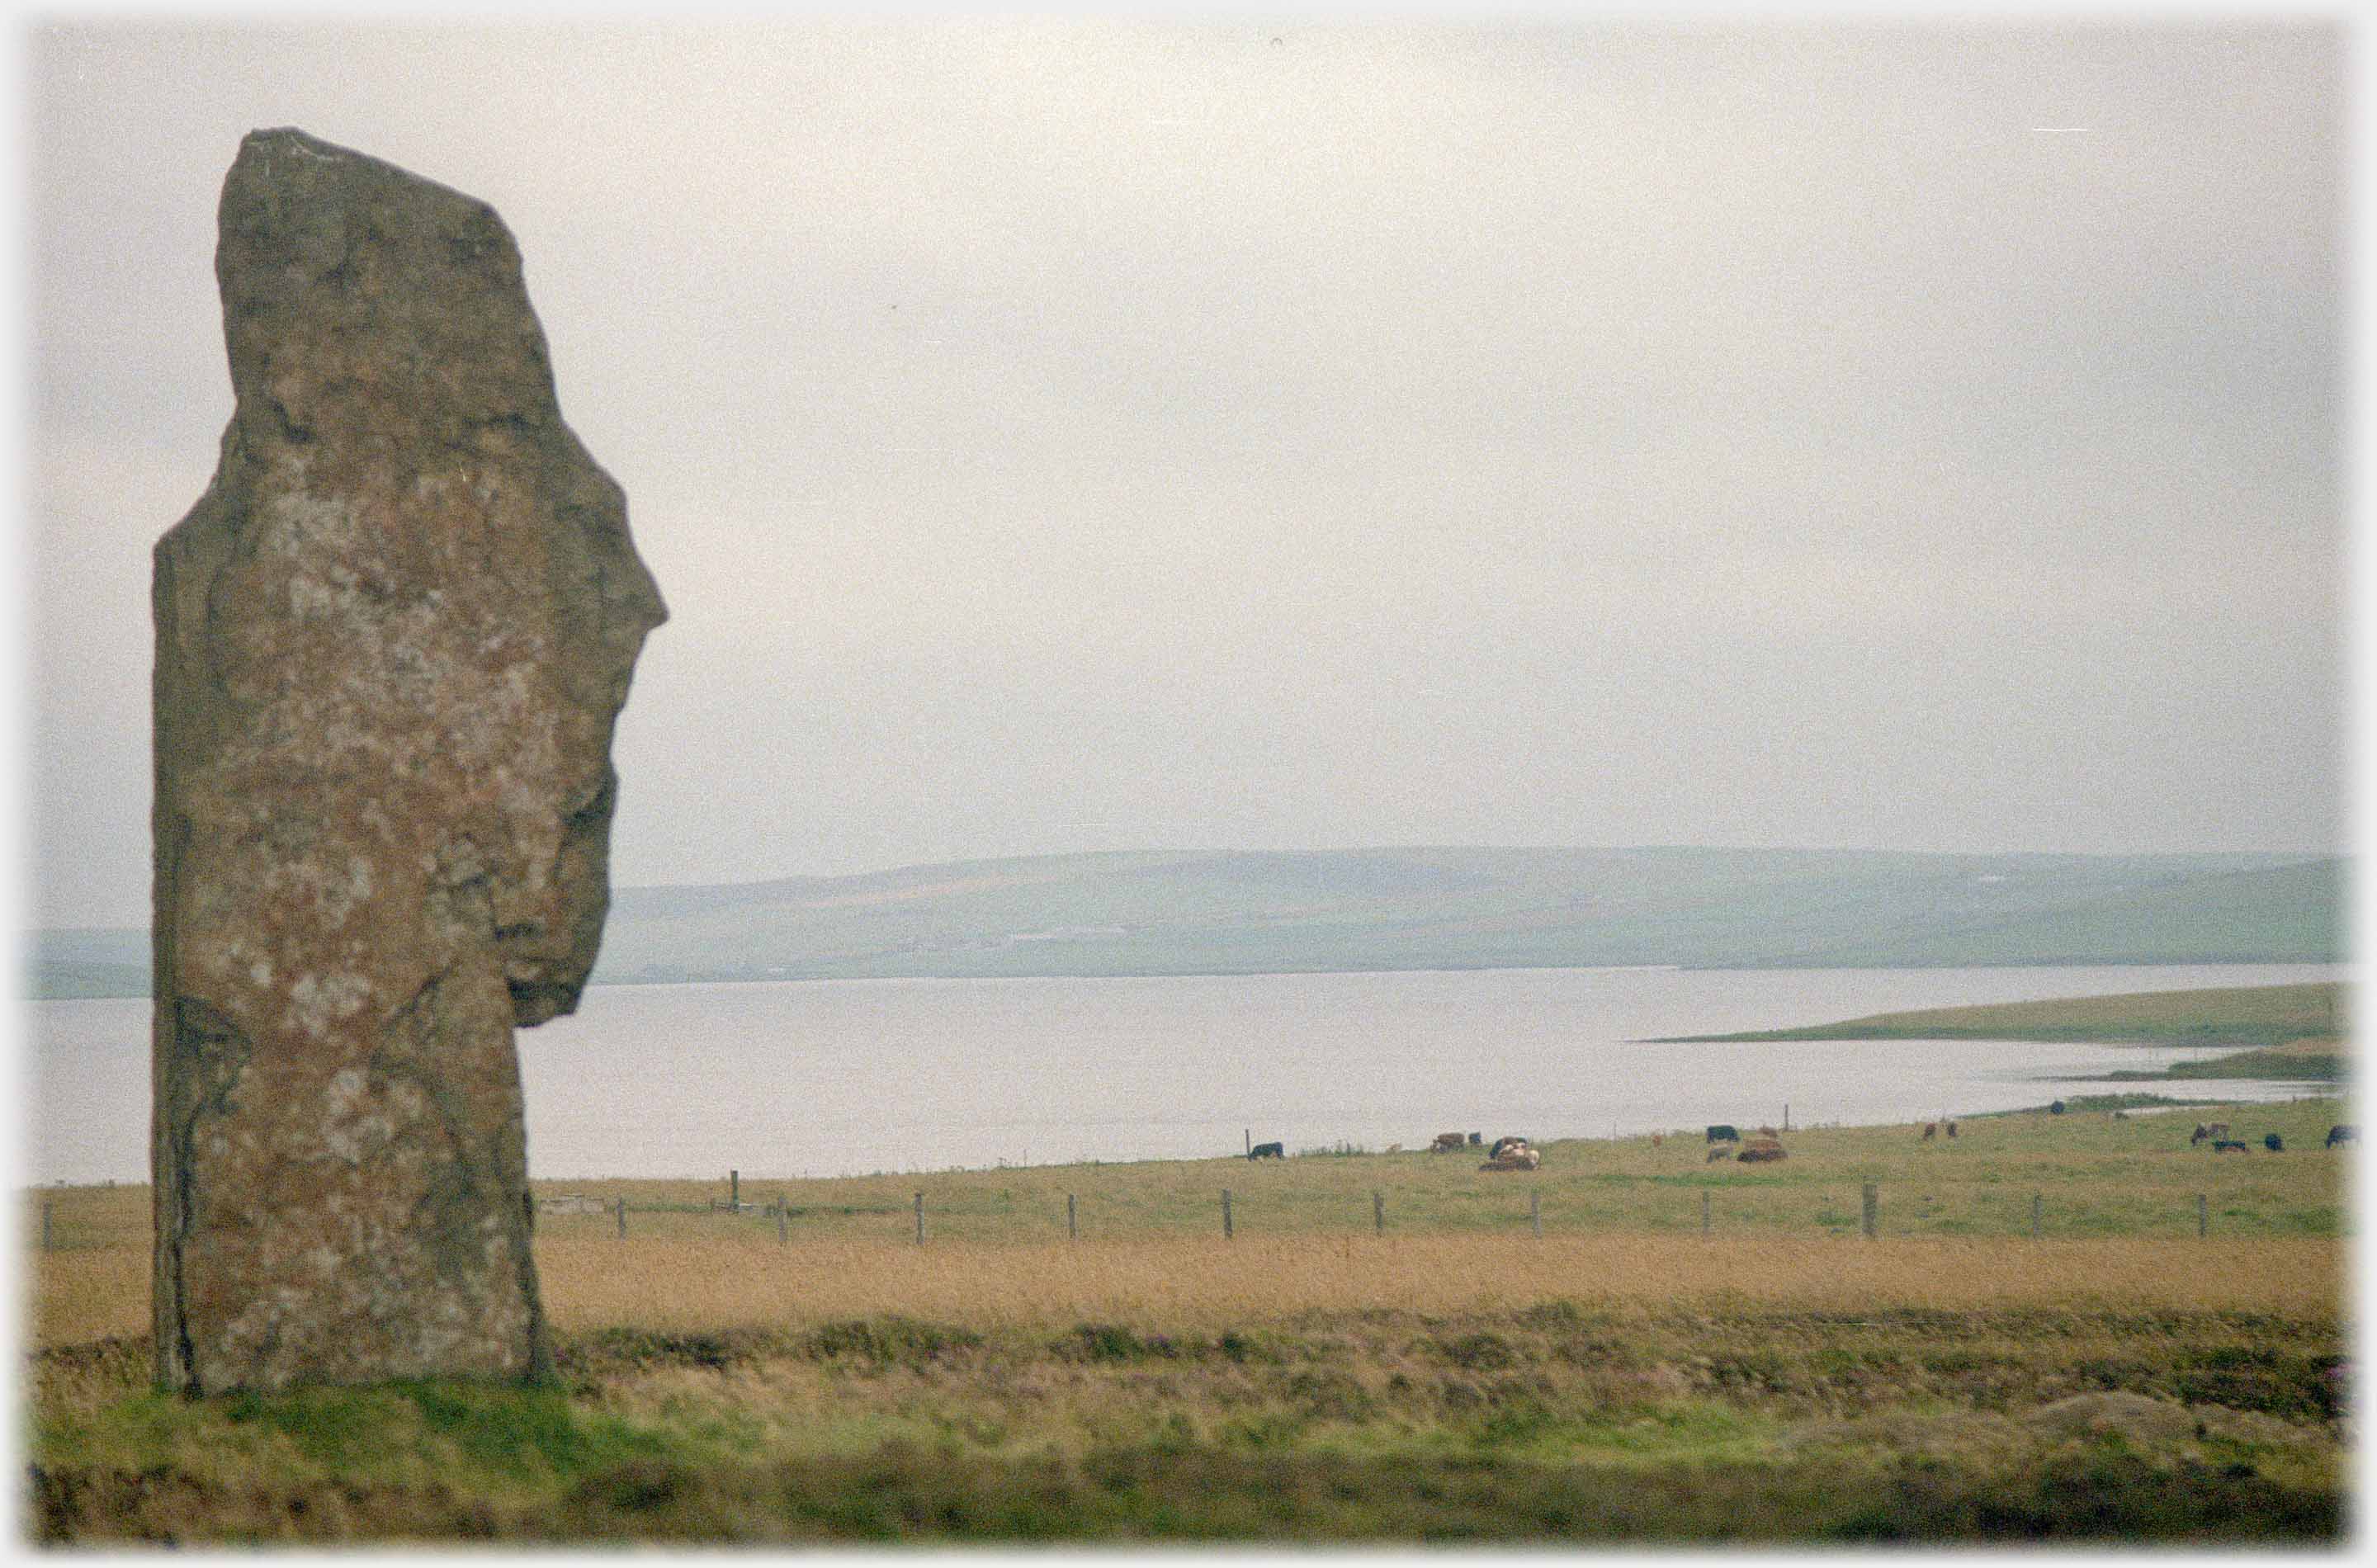 Single standing stone with complex outline.